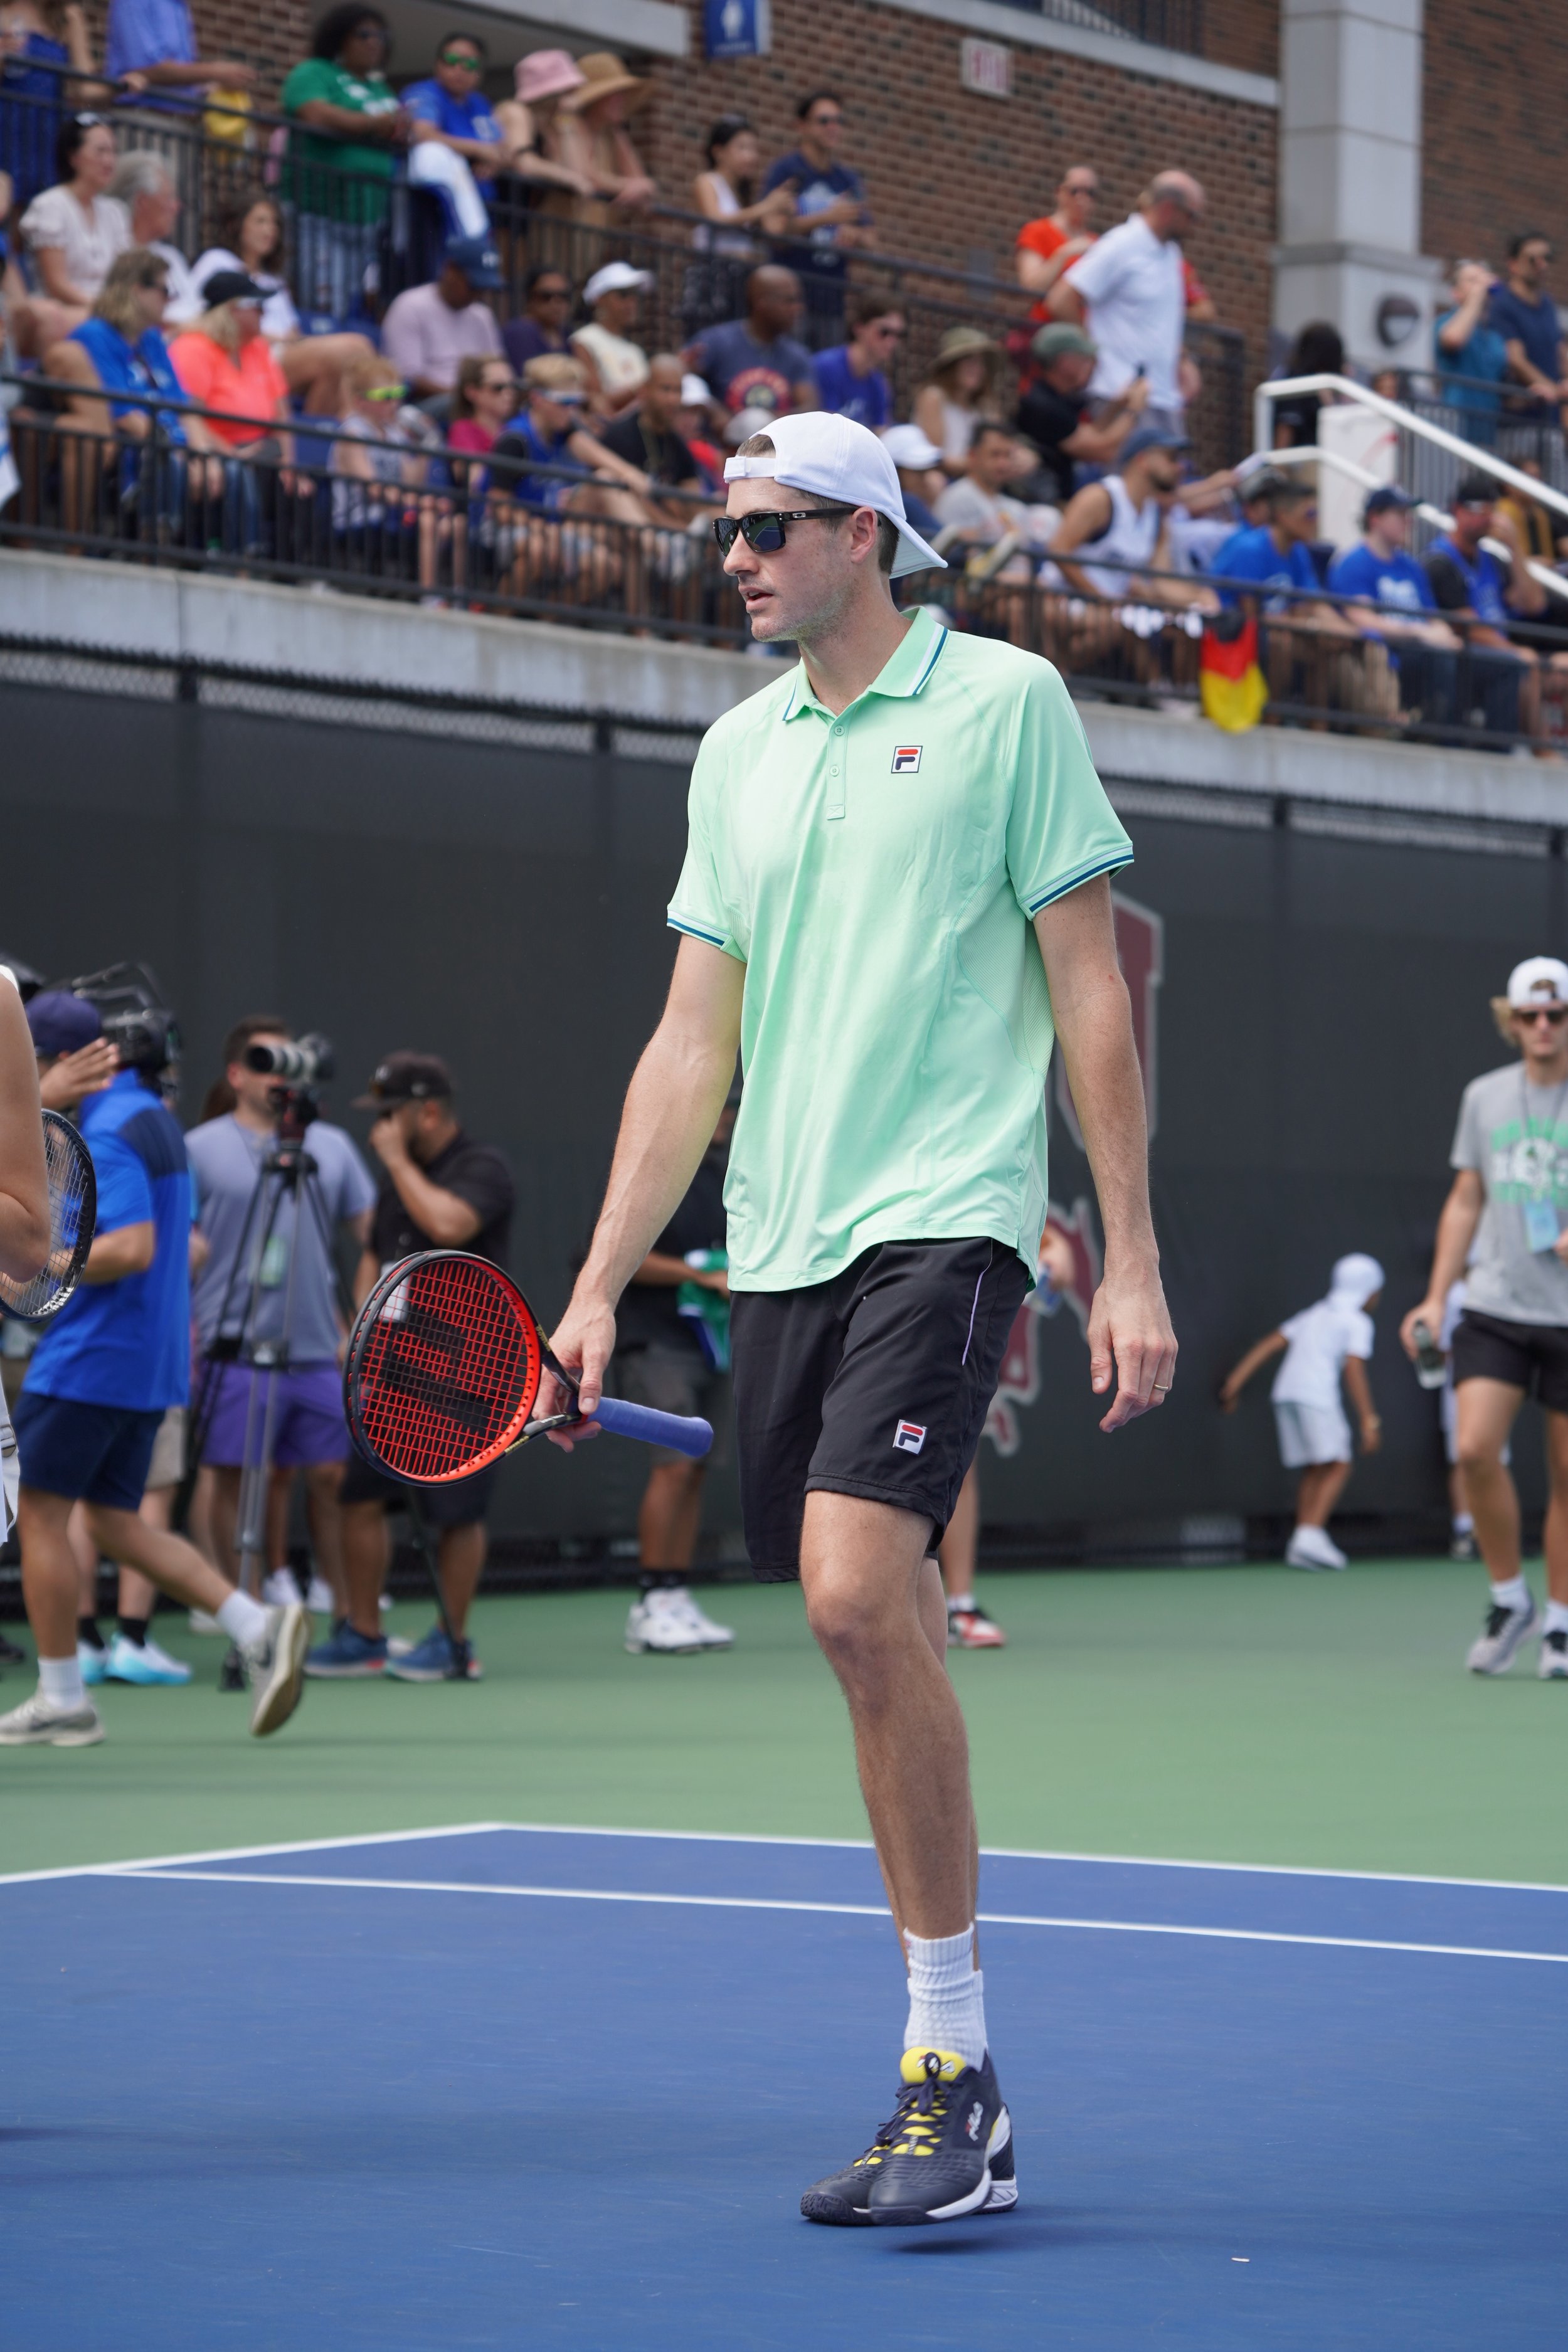   John Isner , winner of the longest tennis match in history. All-time leading ace leader in ATP tour history. With 16 ATP Tour titles, he’s earned 30+ wins and finished 10 straight seasons in top 20 (2010-19). He finished a career-high No. 8 in 2018